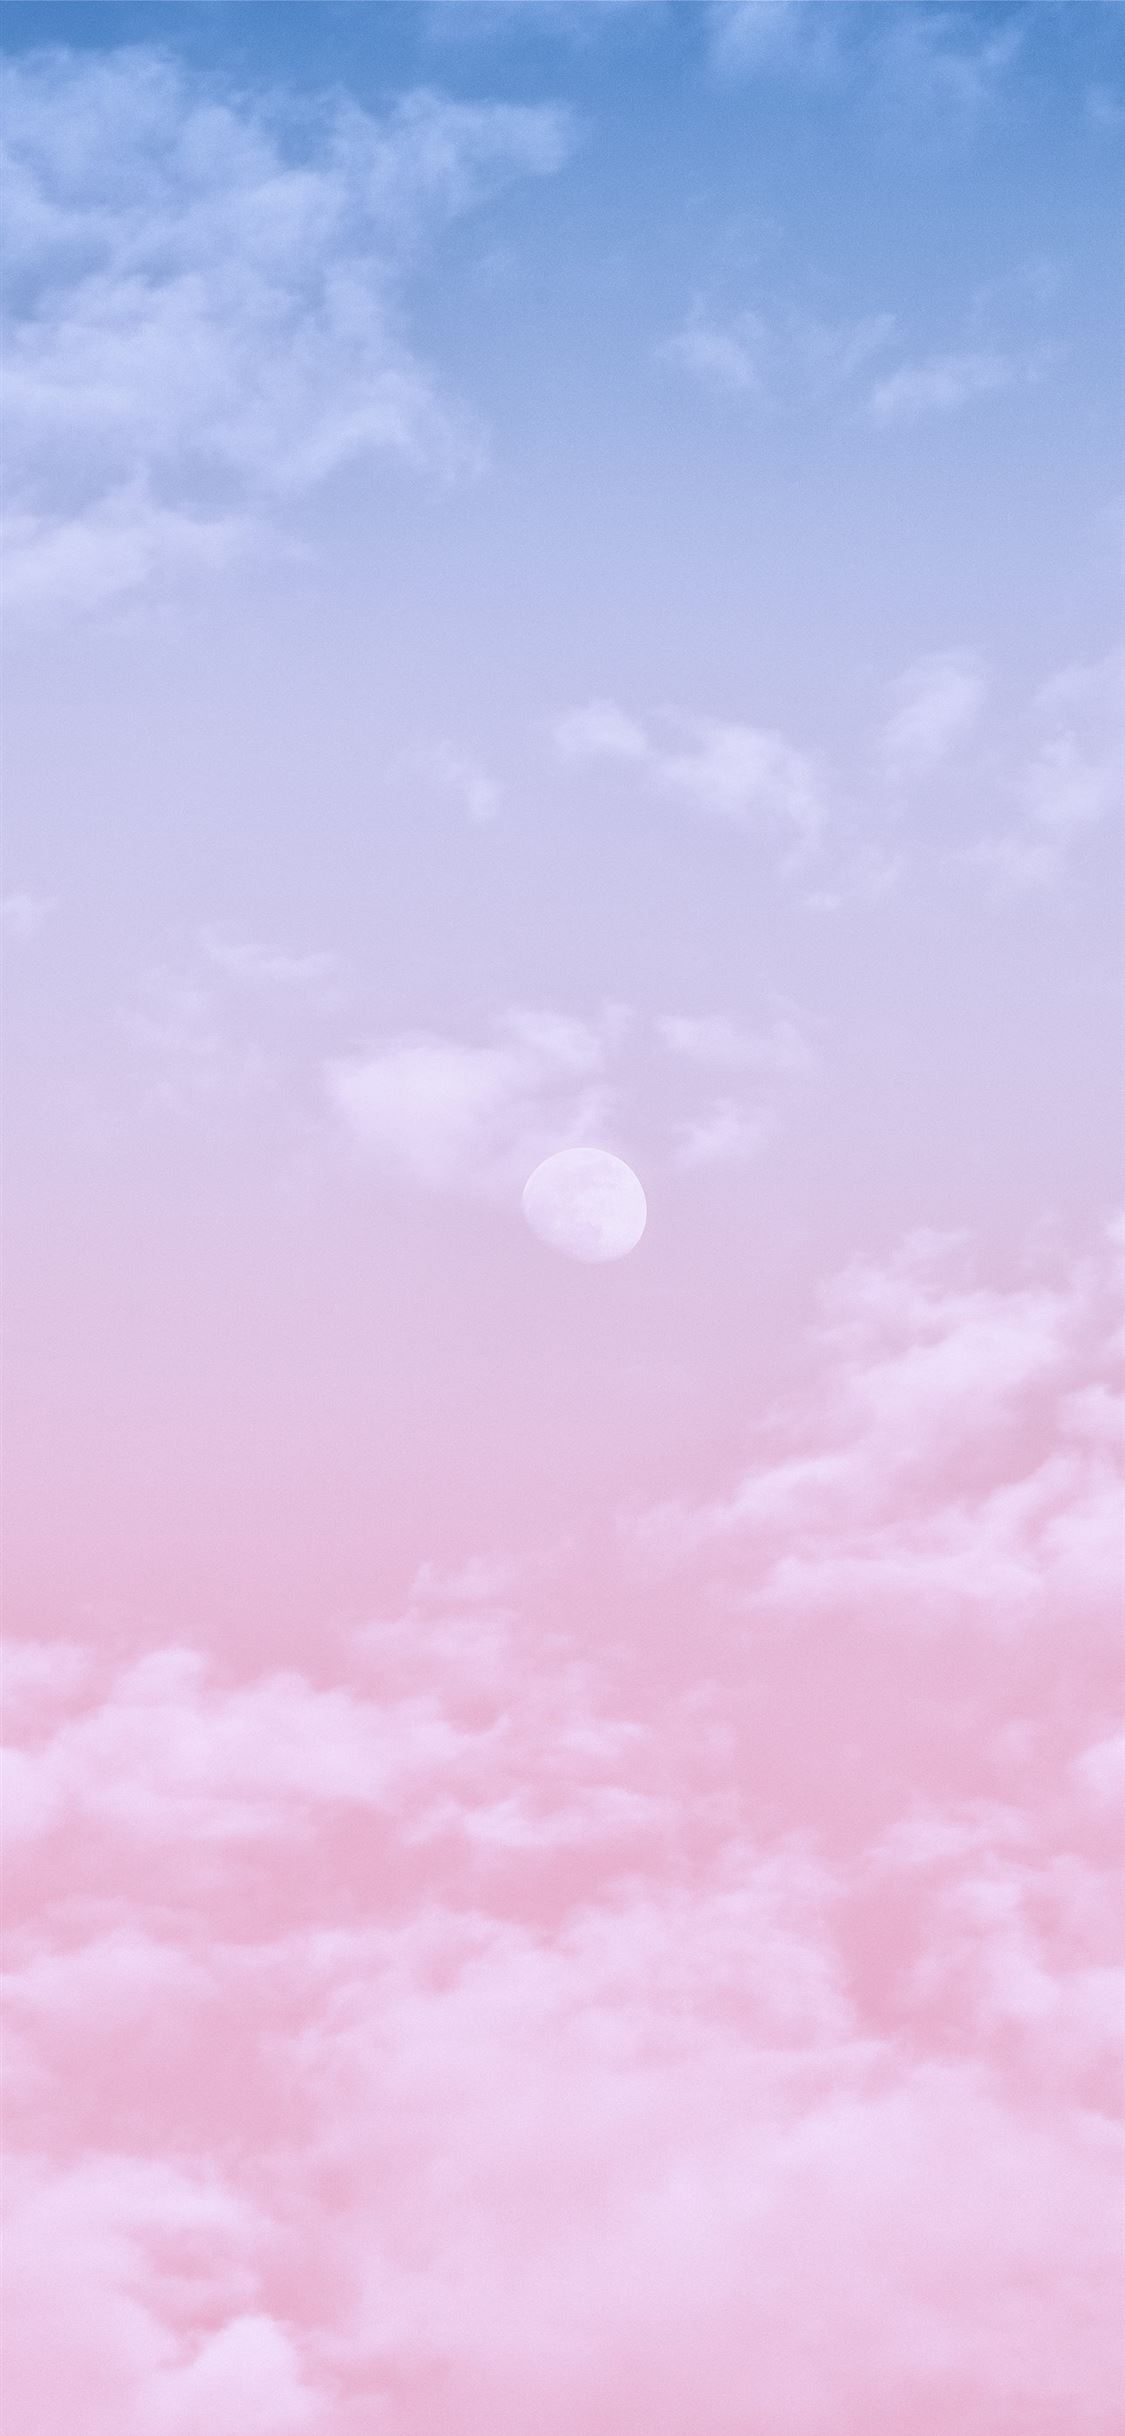 40 Breathtaking Cloud Aesthetic Wallpaper For iPhones (Free Download!)